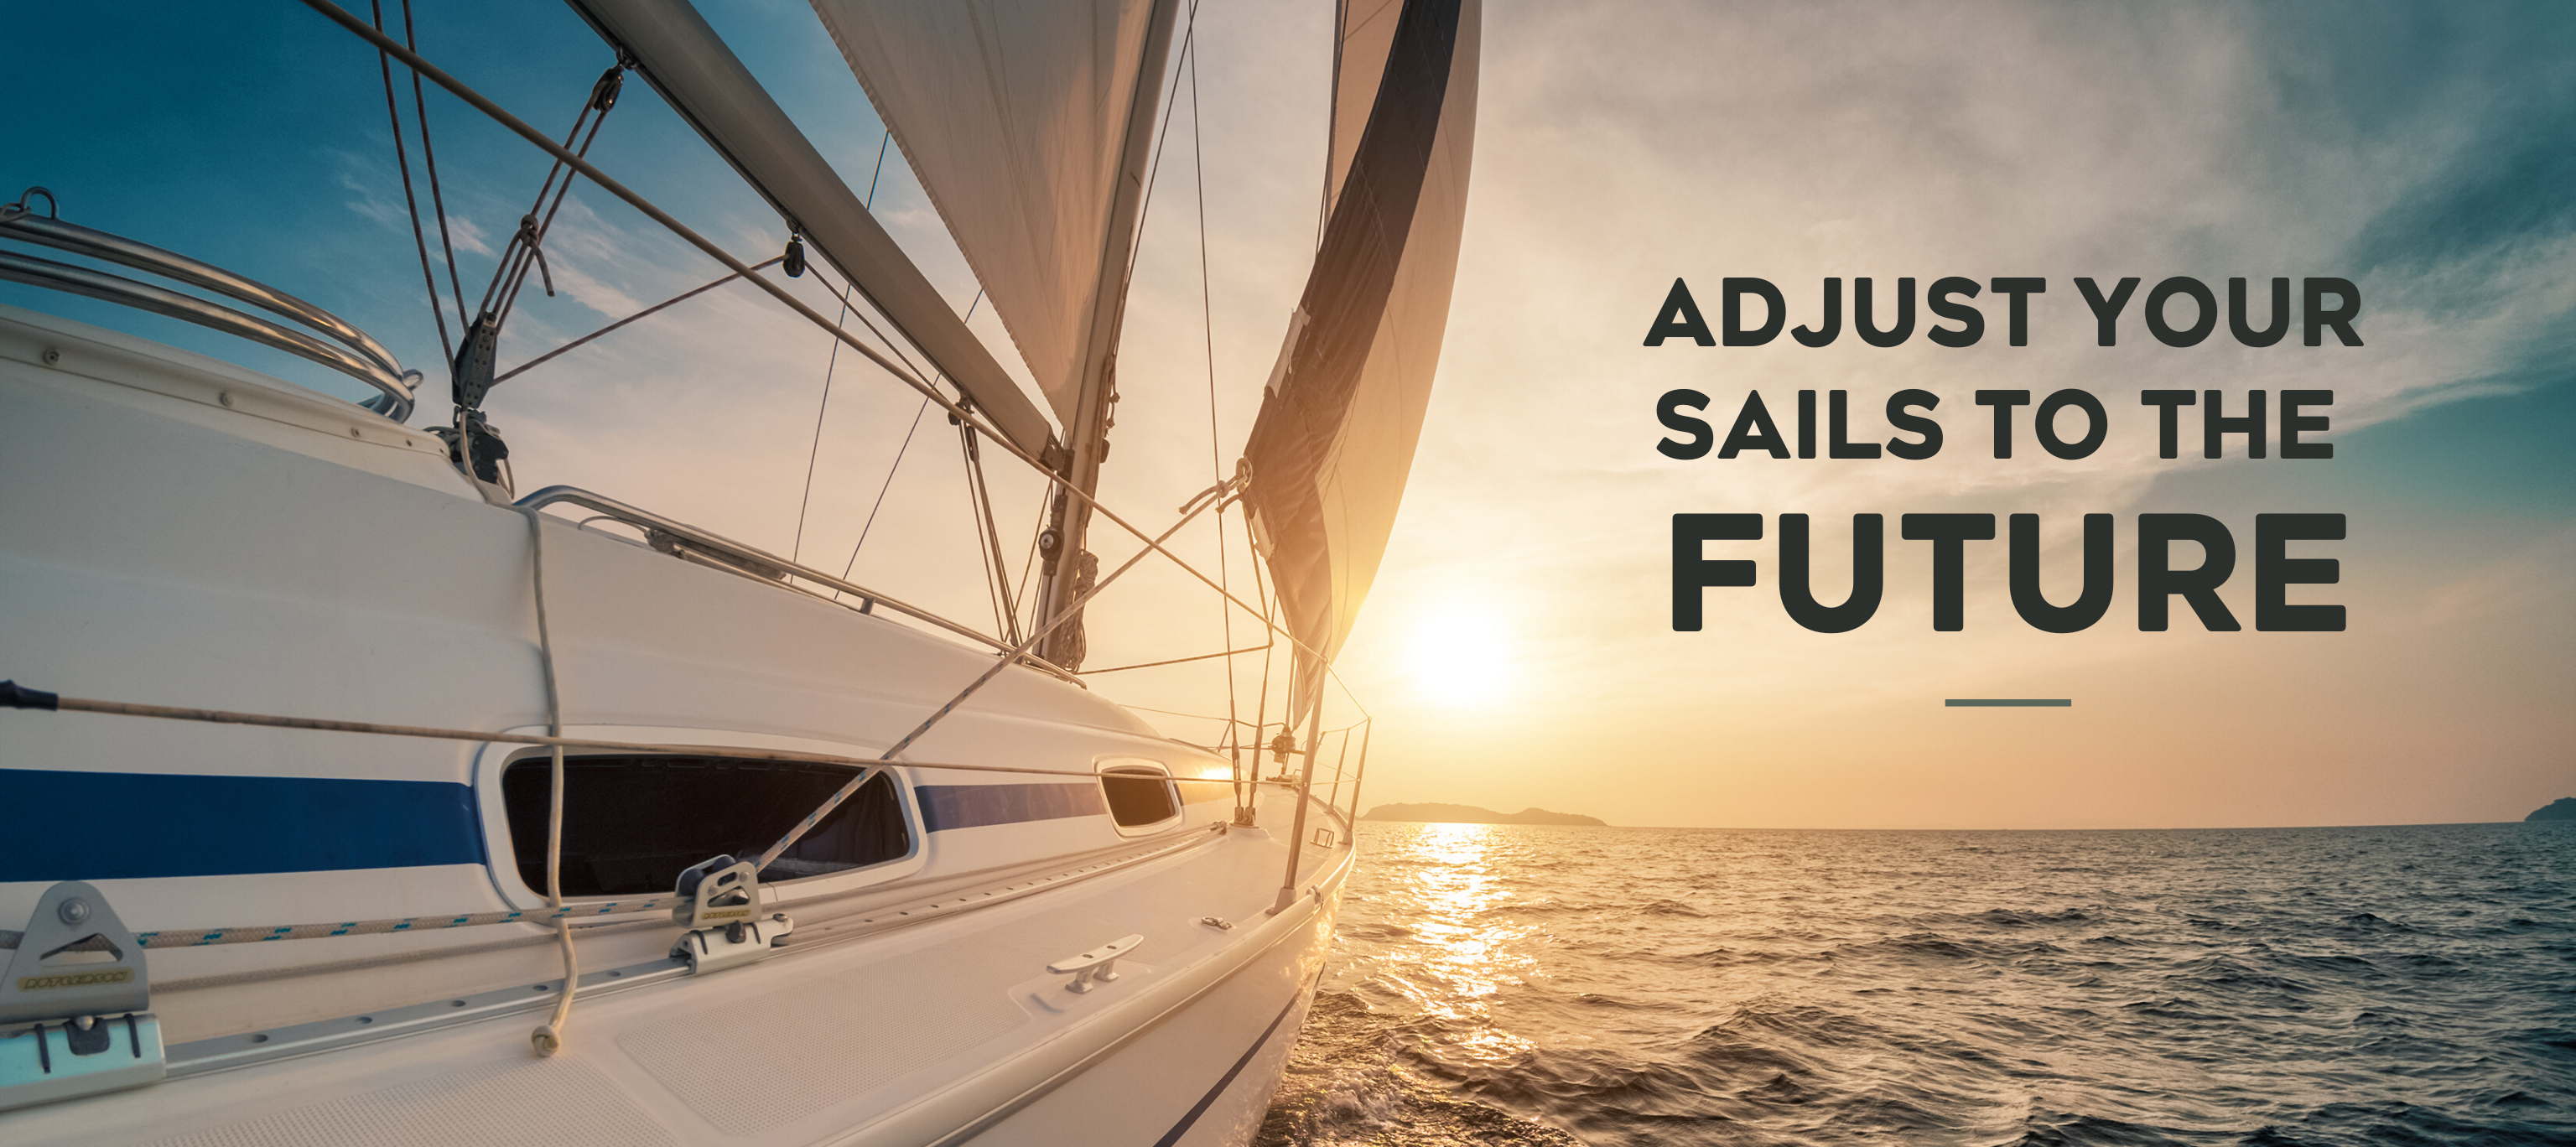 Adjust Your Sails To The Future Surpass Your Goals